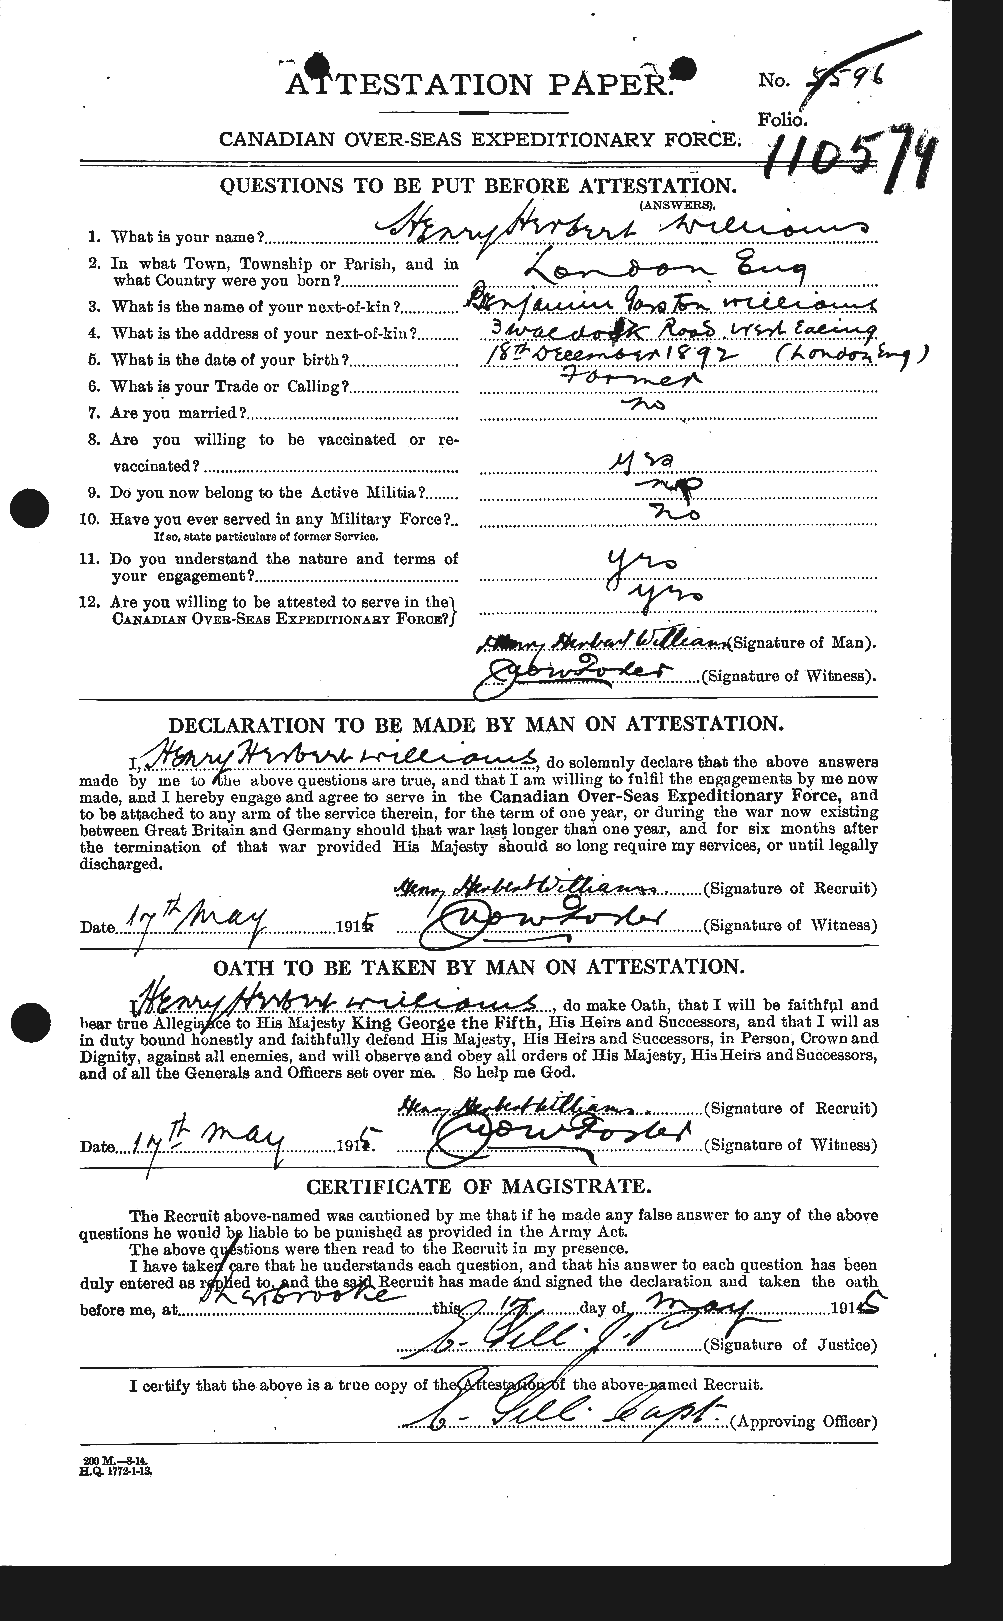 Personnel Records of the First World War - CEF 677409a